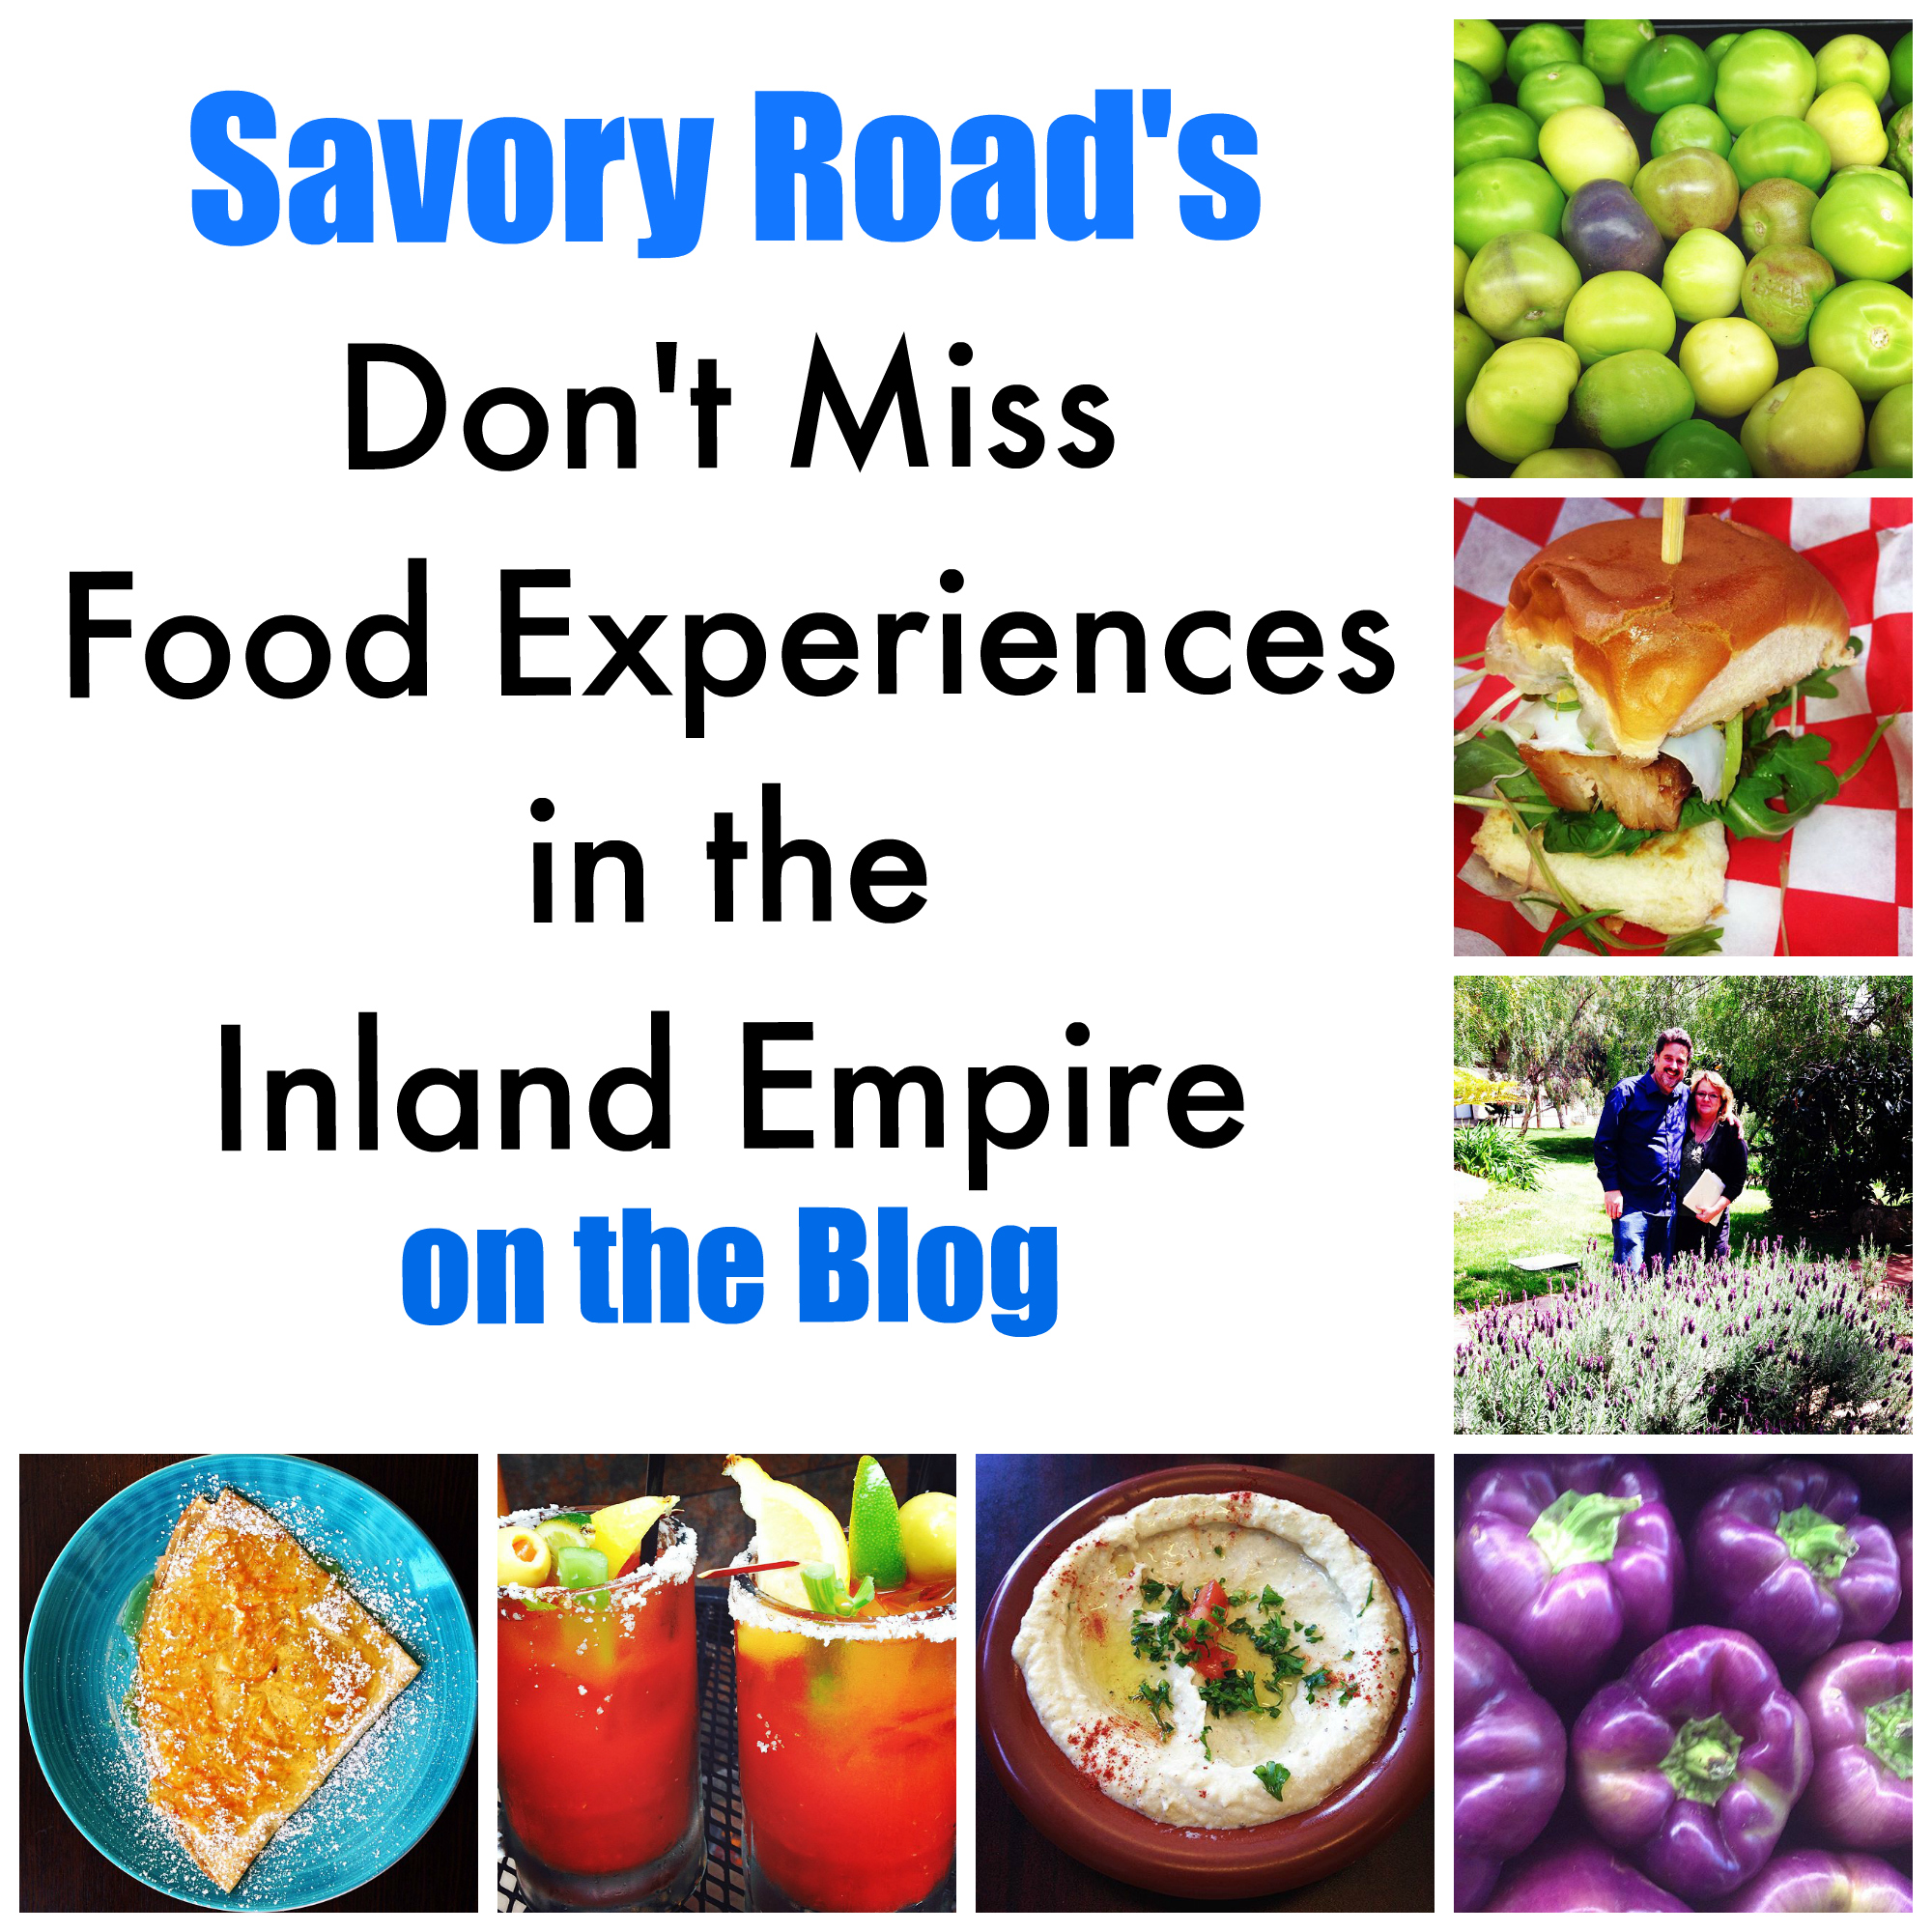 Inland Empire’s “Don’t Miss” Food Experiences